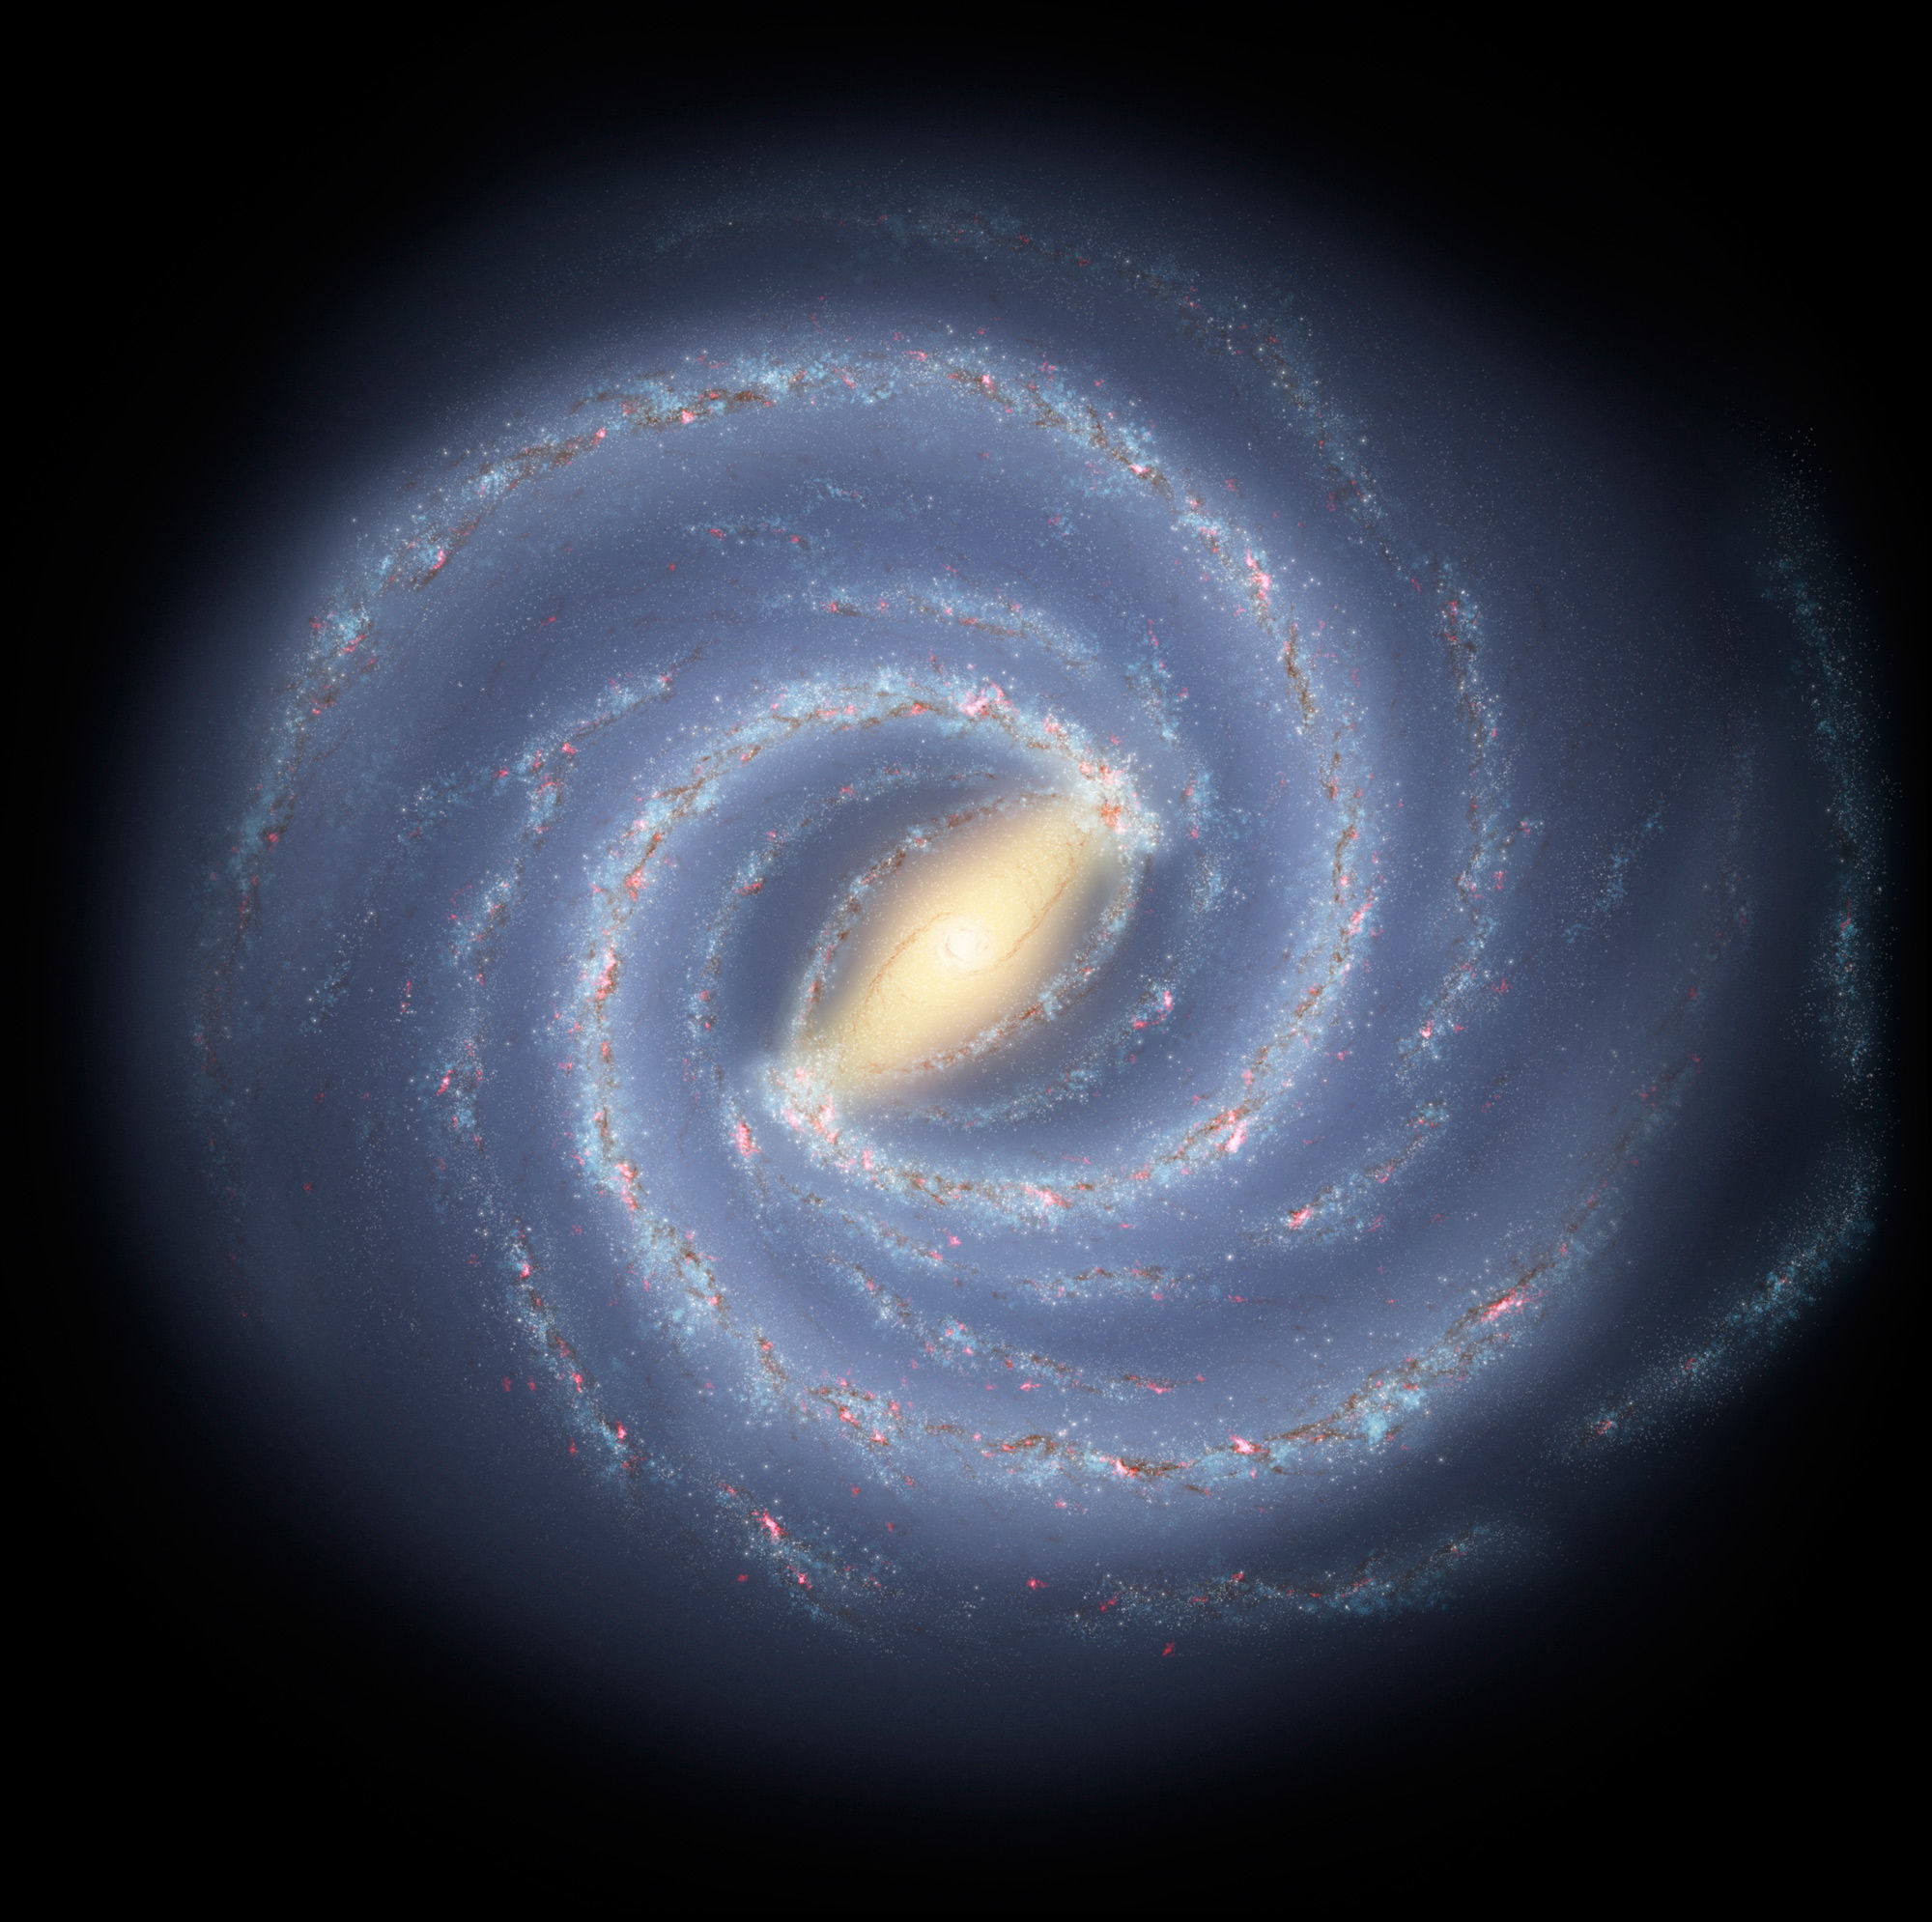 The Milky Way is a disk galaxy with hundreds of billions of stars. A new study indicates it underwent a burst of vigorous star formation that peaked about 2 billion years ago. Credit: NASA/JPL-Caltech/R. Hurt (SSC/Caltech)